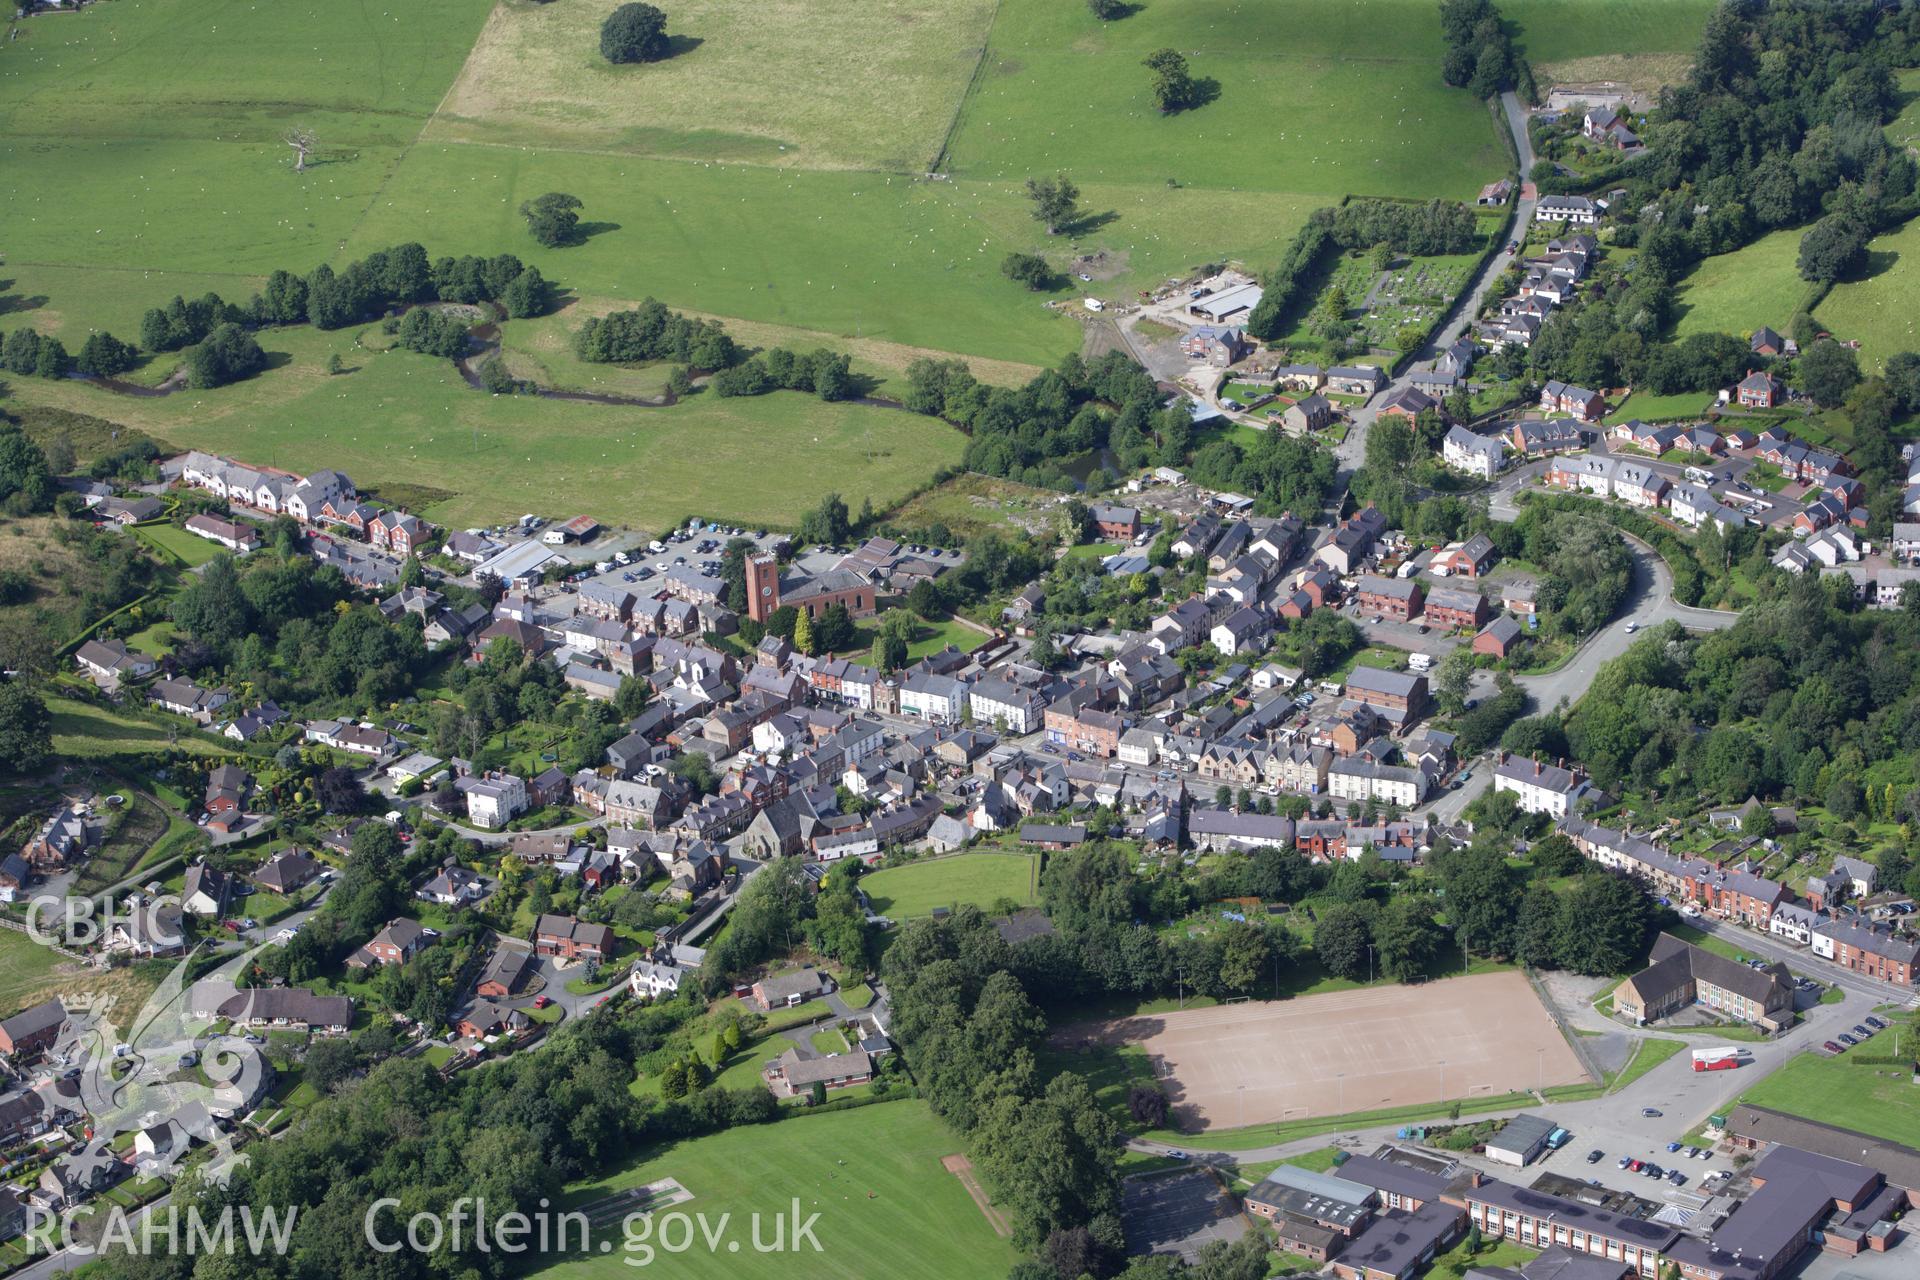 RCAHMW colour oblique aerial photograph of Llanfyllin. Taken on 30 July 2009 by Toby Driver